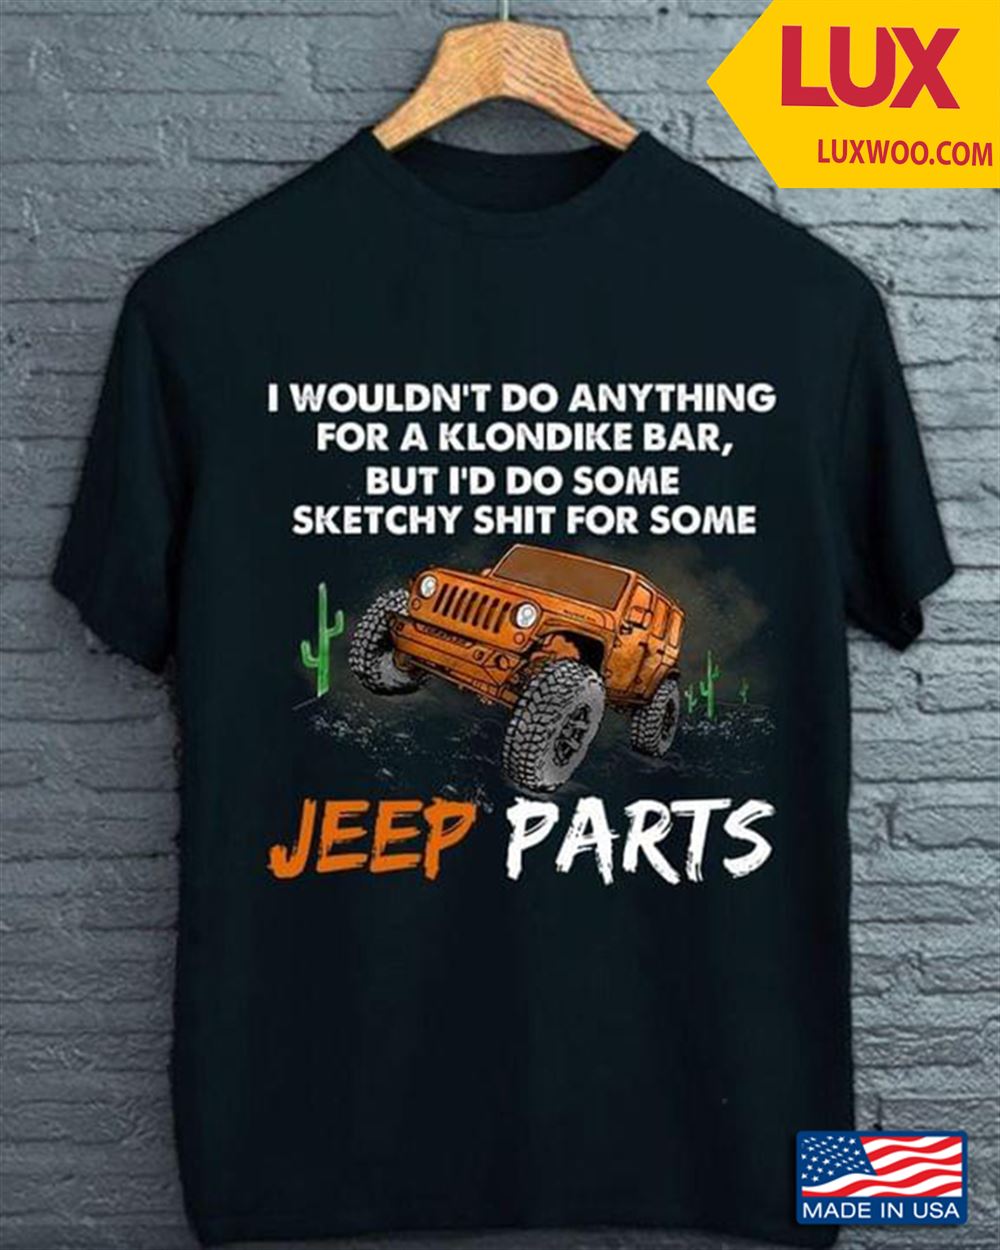 I Wouldnt Do Anything For A Klondike Bar But Id Do Some Sketchy Shit For Some Jeep Parts Tshirt Size Up To 5xl